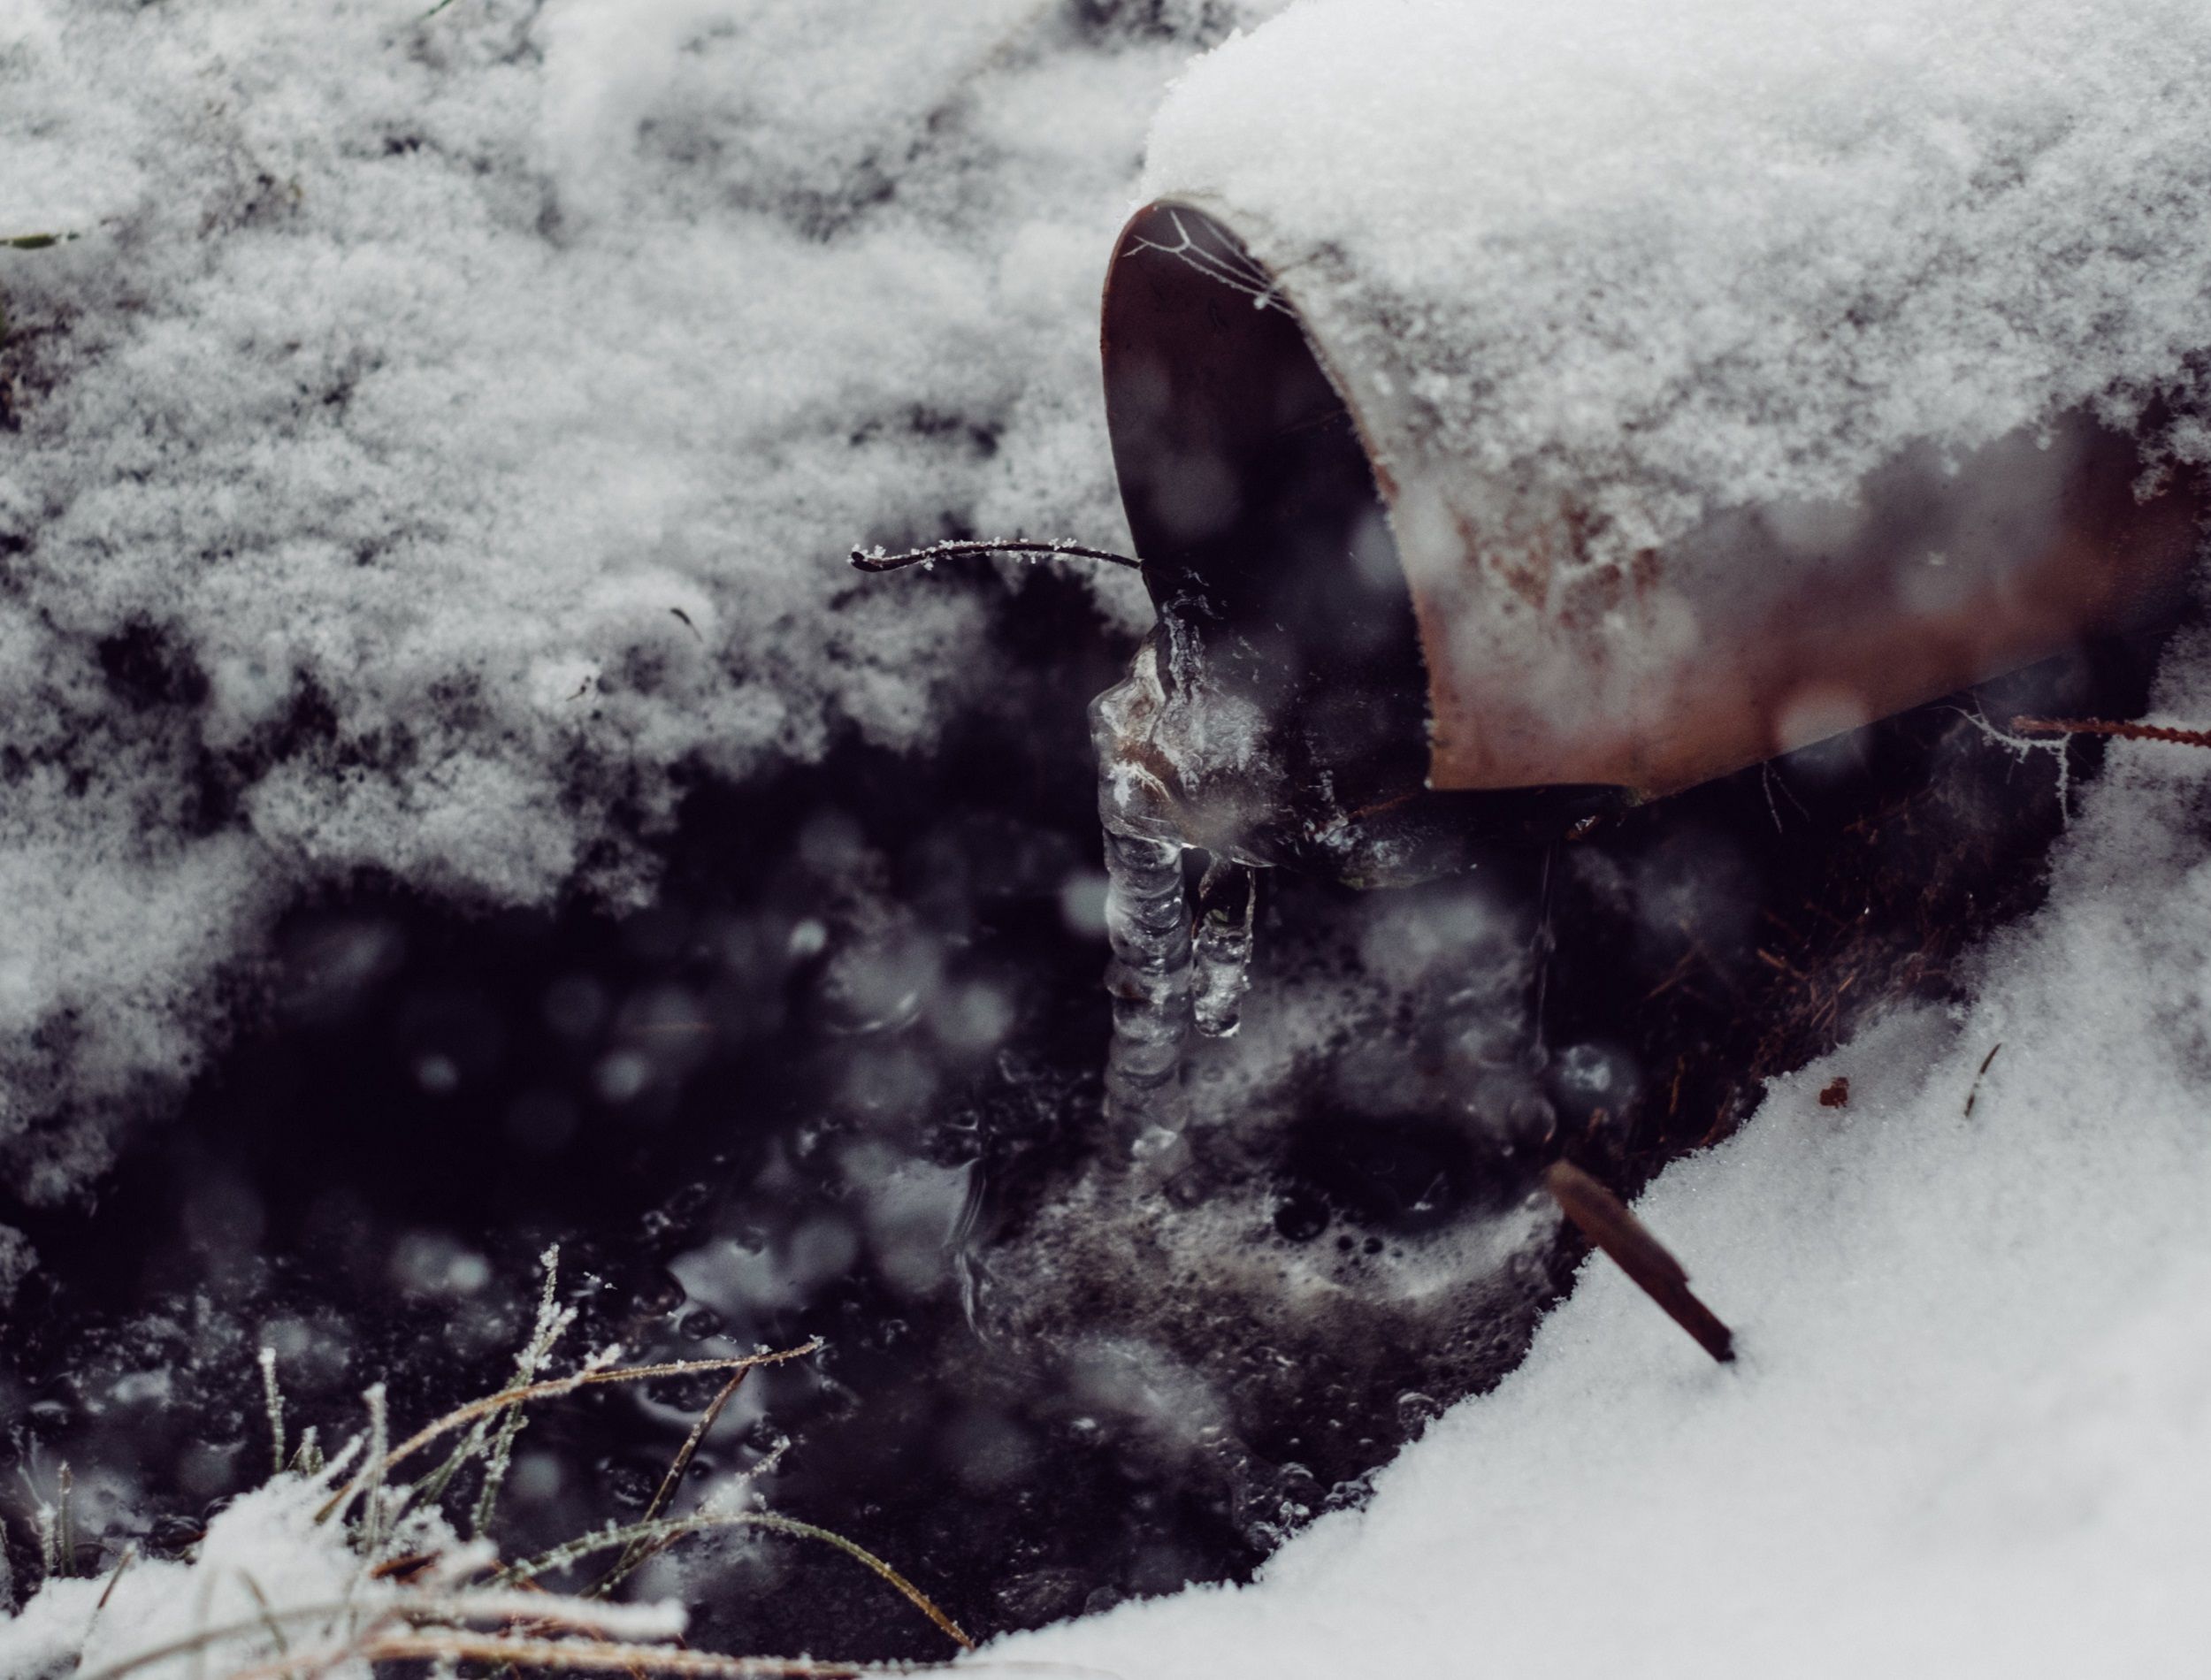 Drain pipe in the snow with icicles and slush